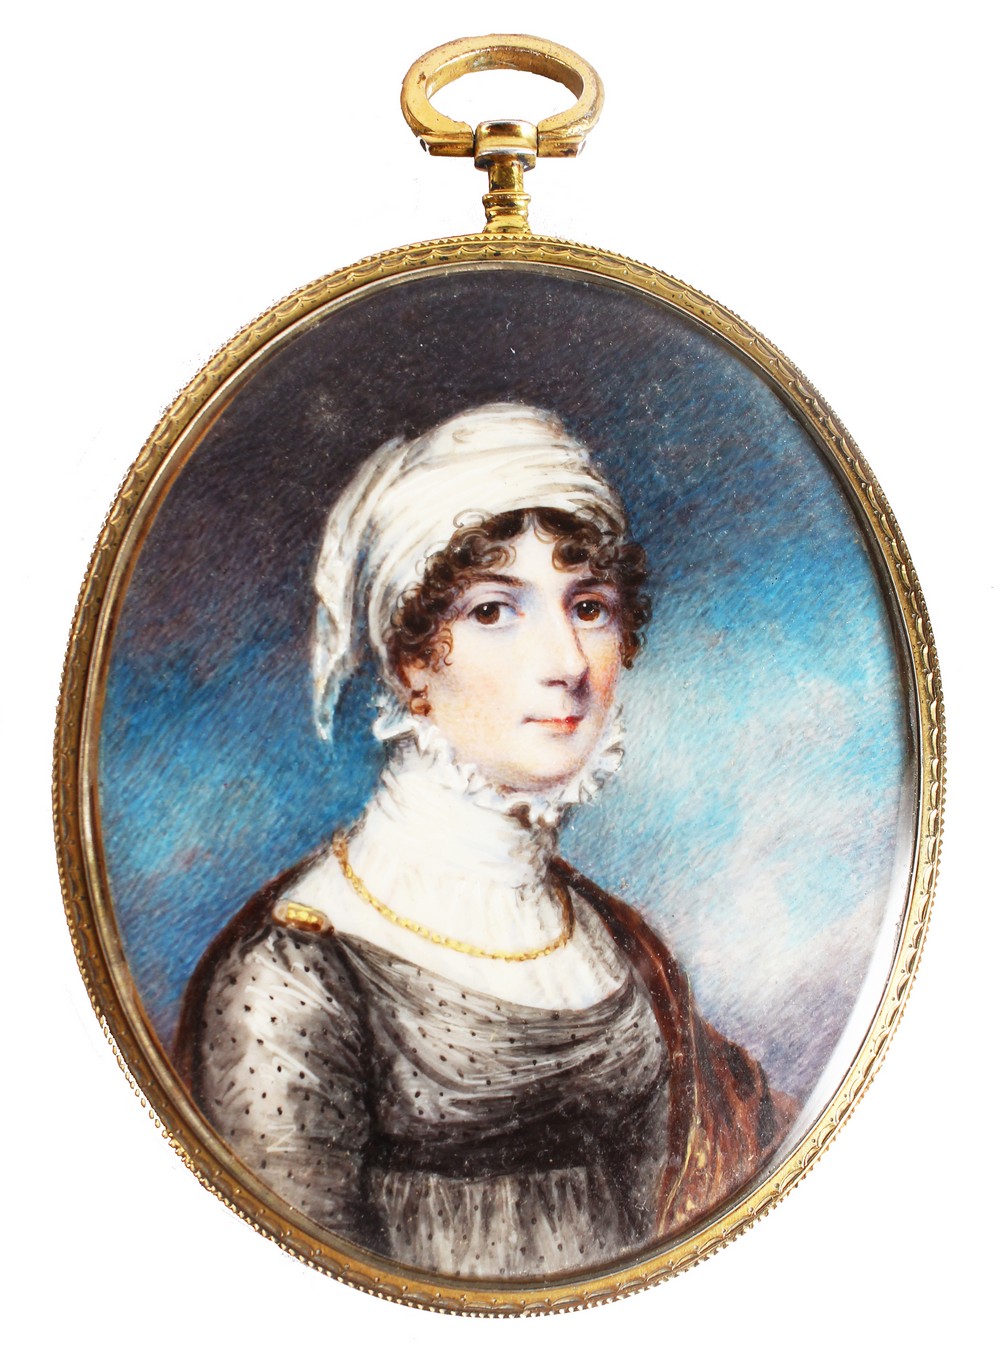 A GOOD OVAL PORTRAIT OF A LADY, wearing a white head scarf, large lace collar, a gold chain and